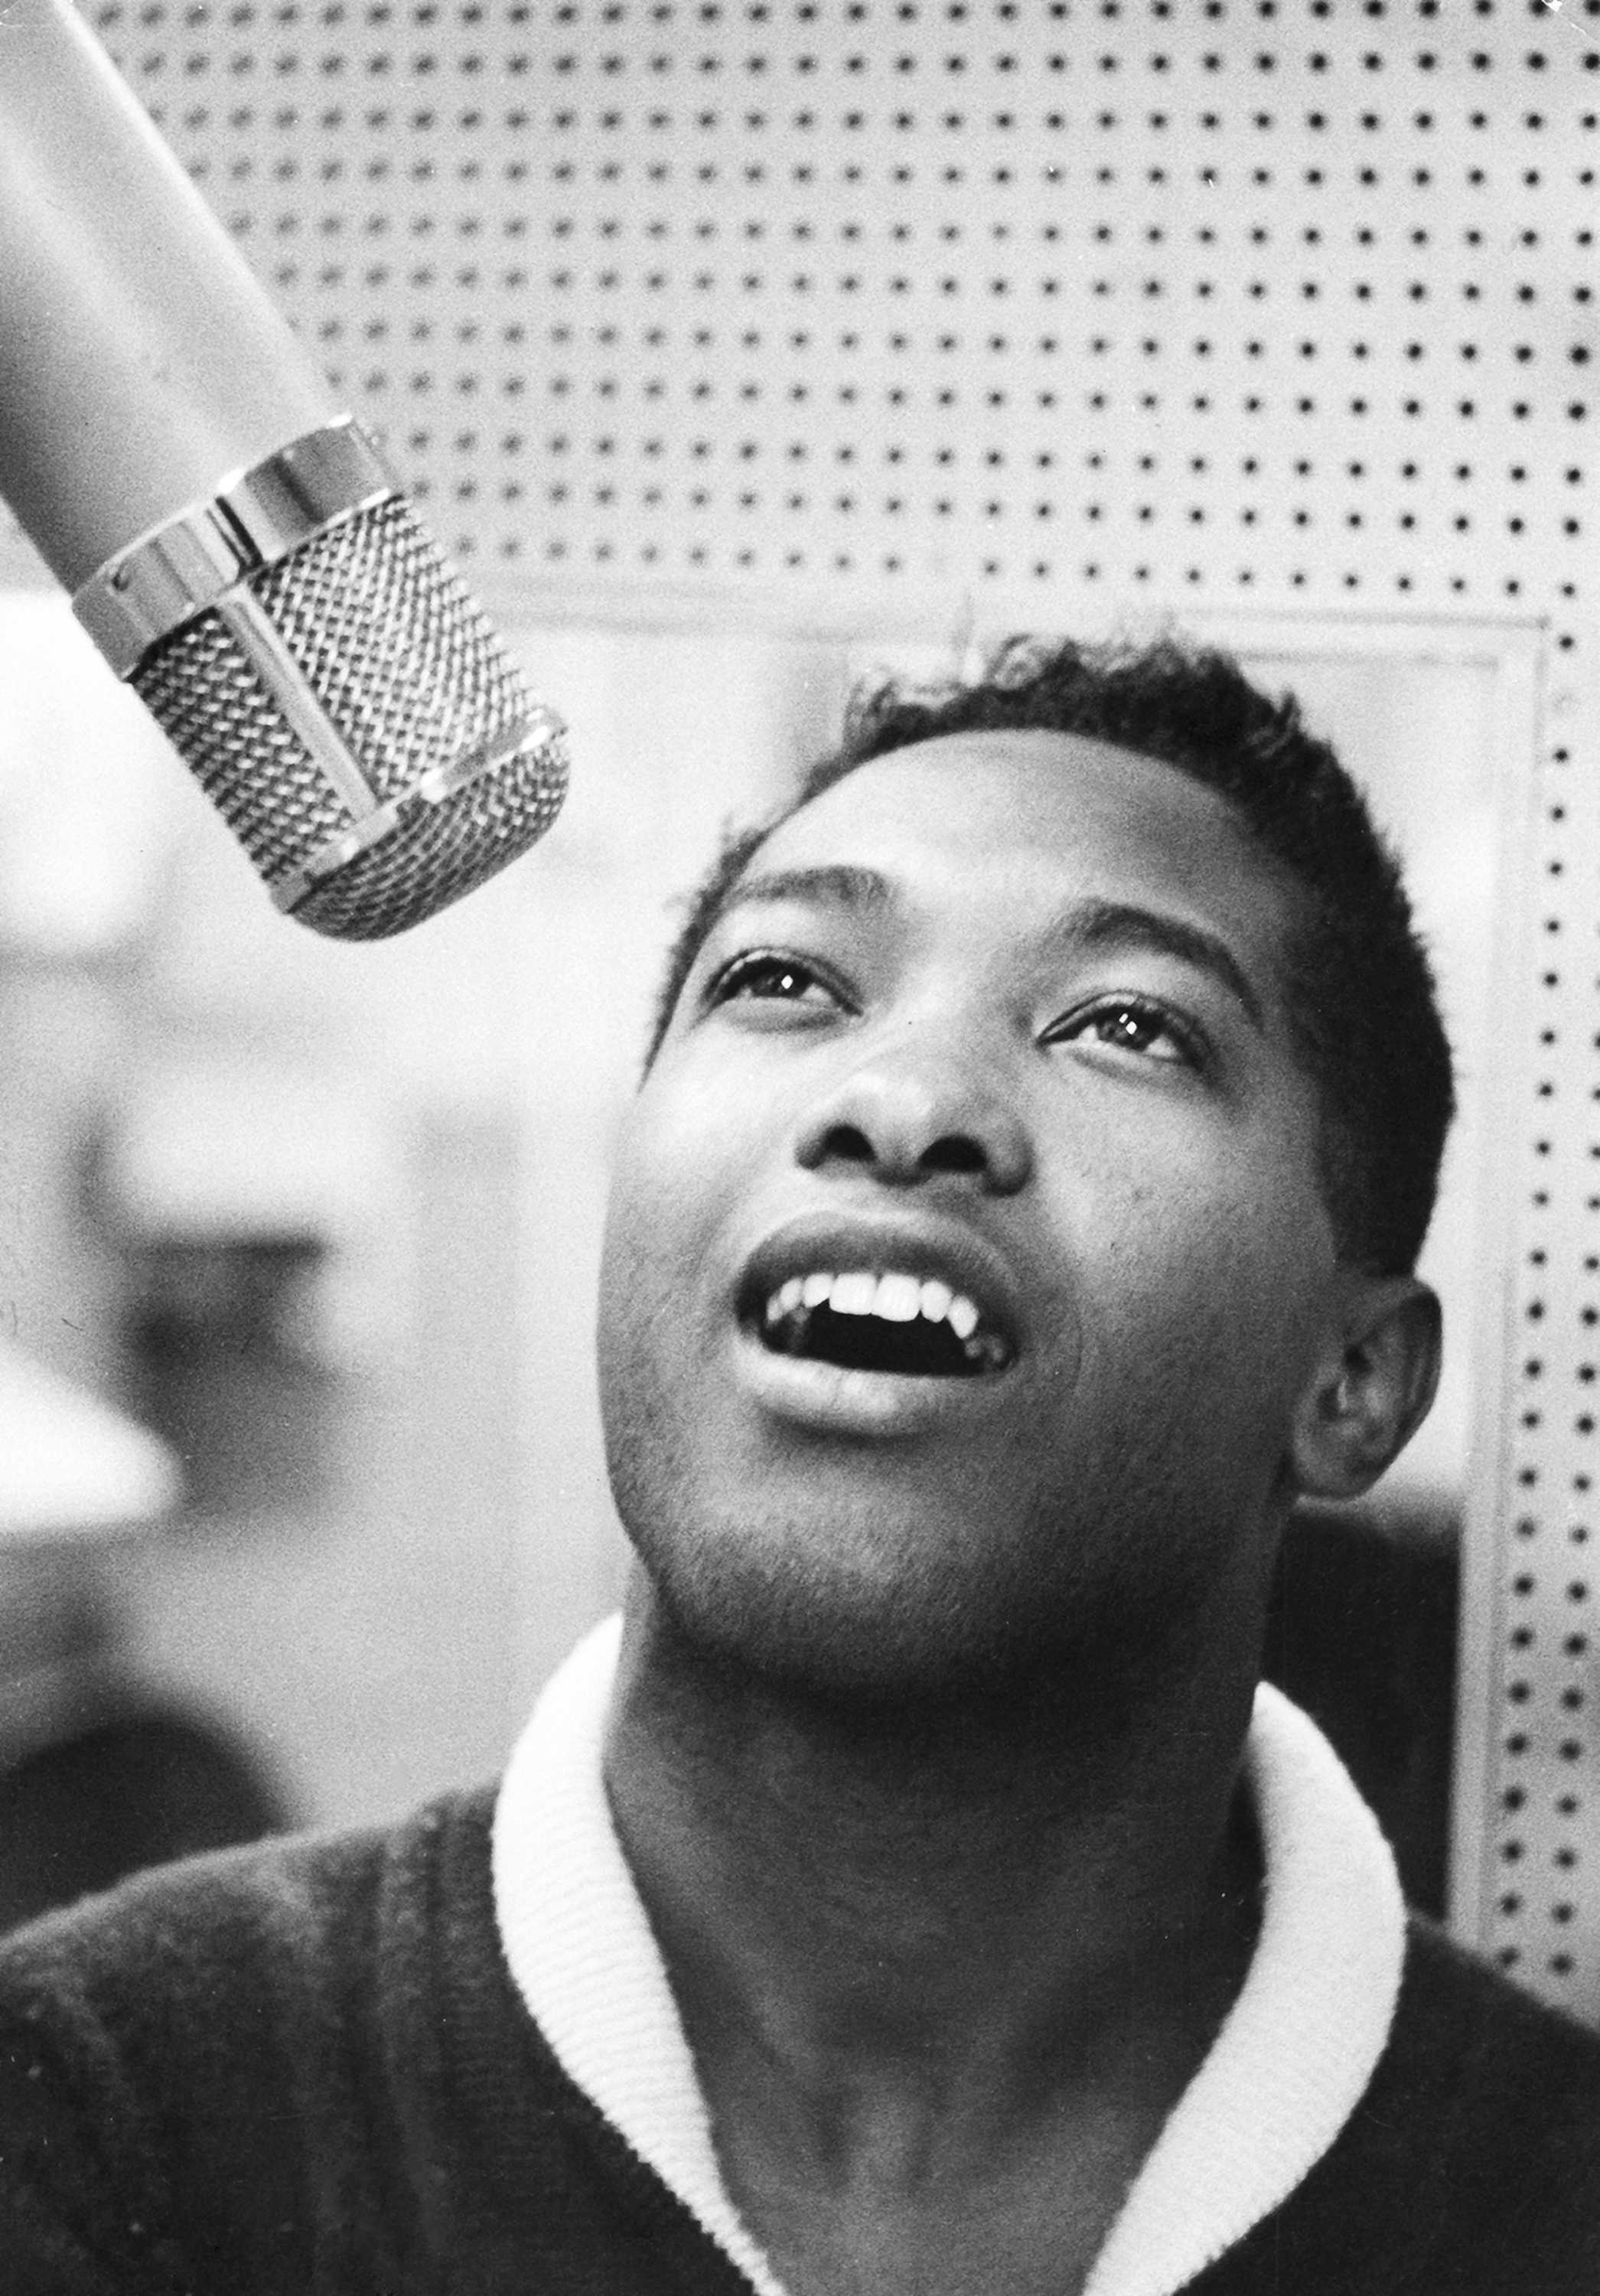 Close up black and white photograph of Sam Cooke singing into a microphone